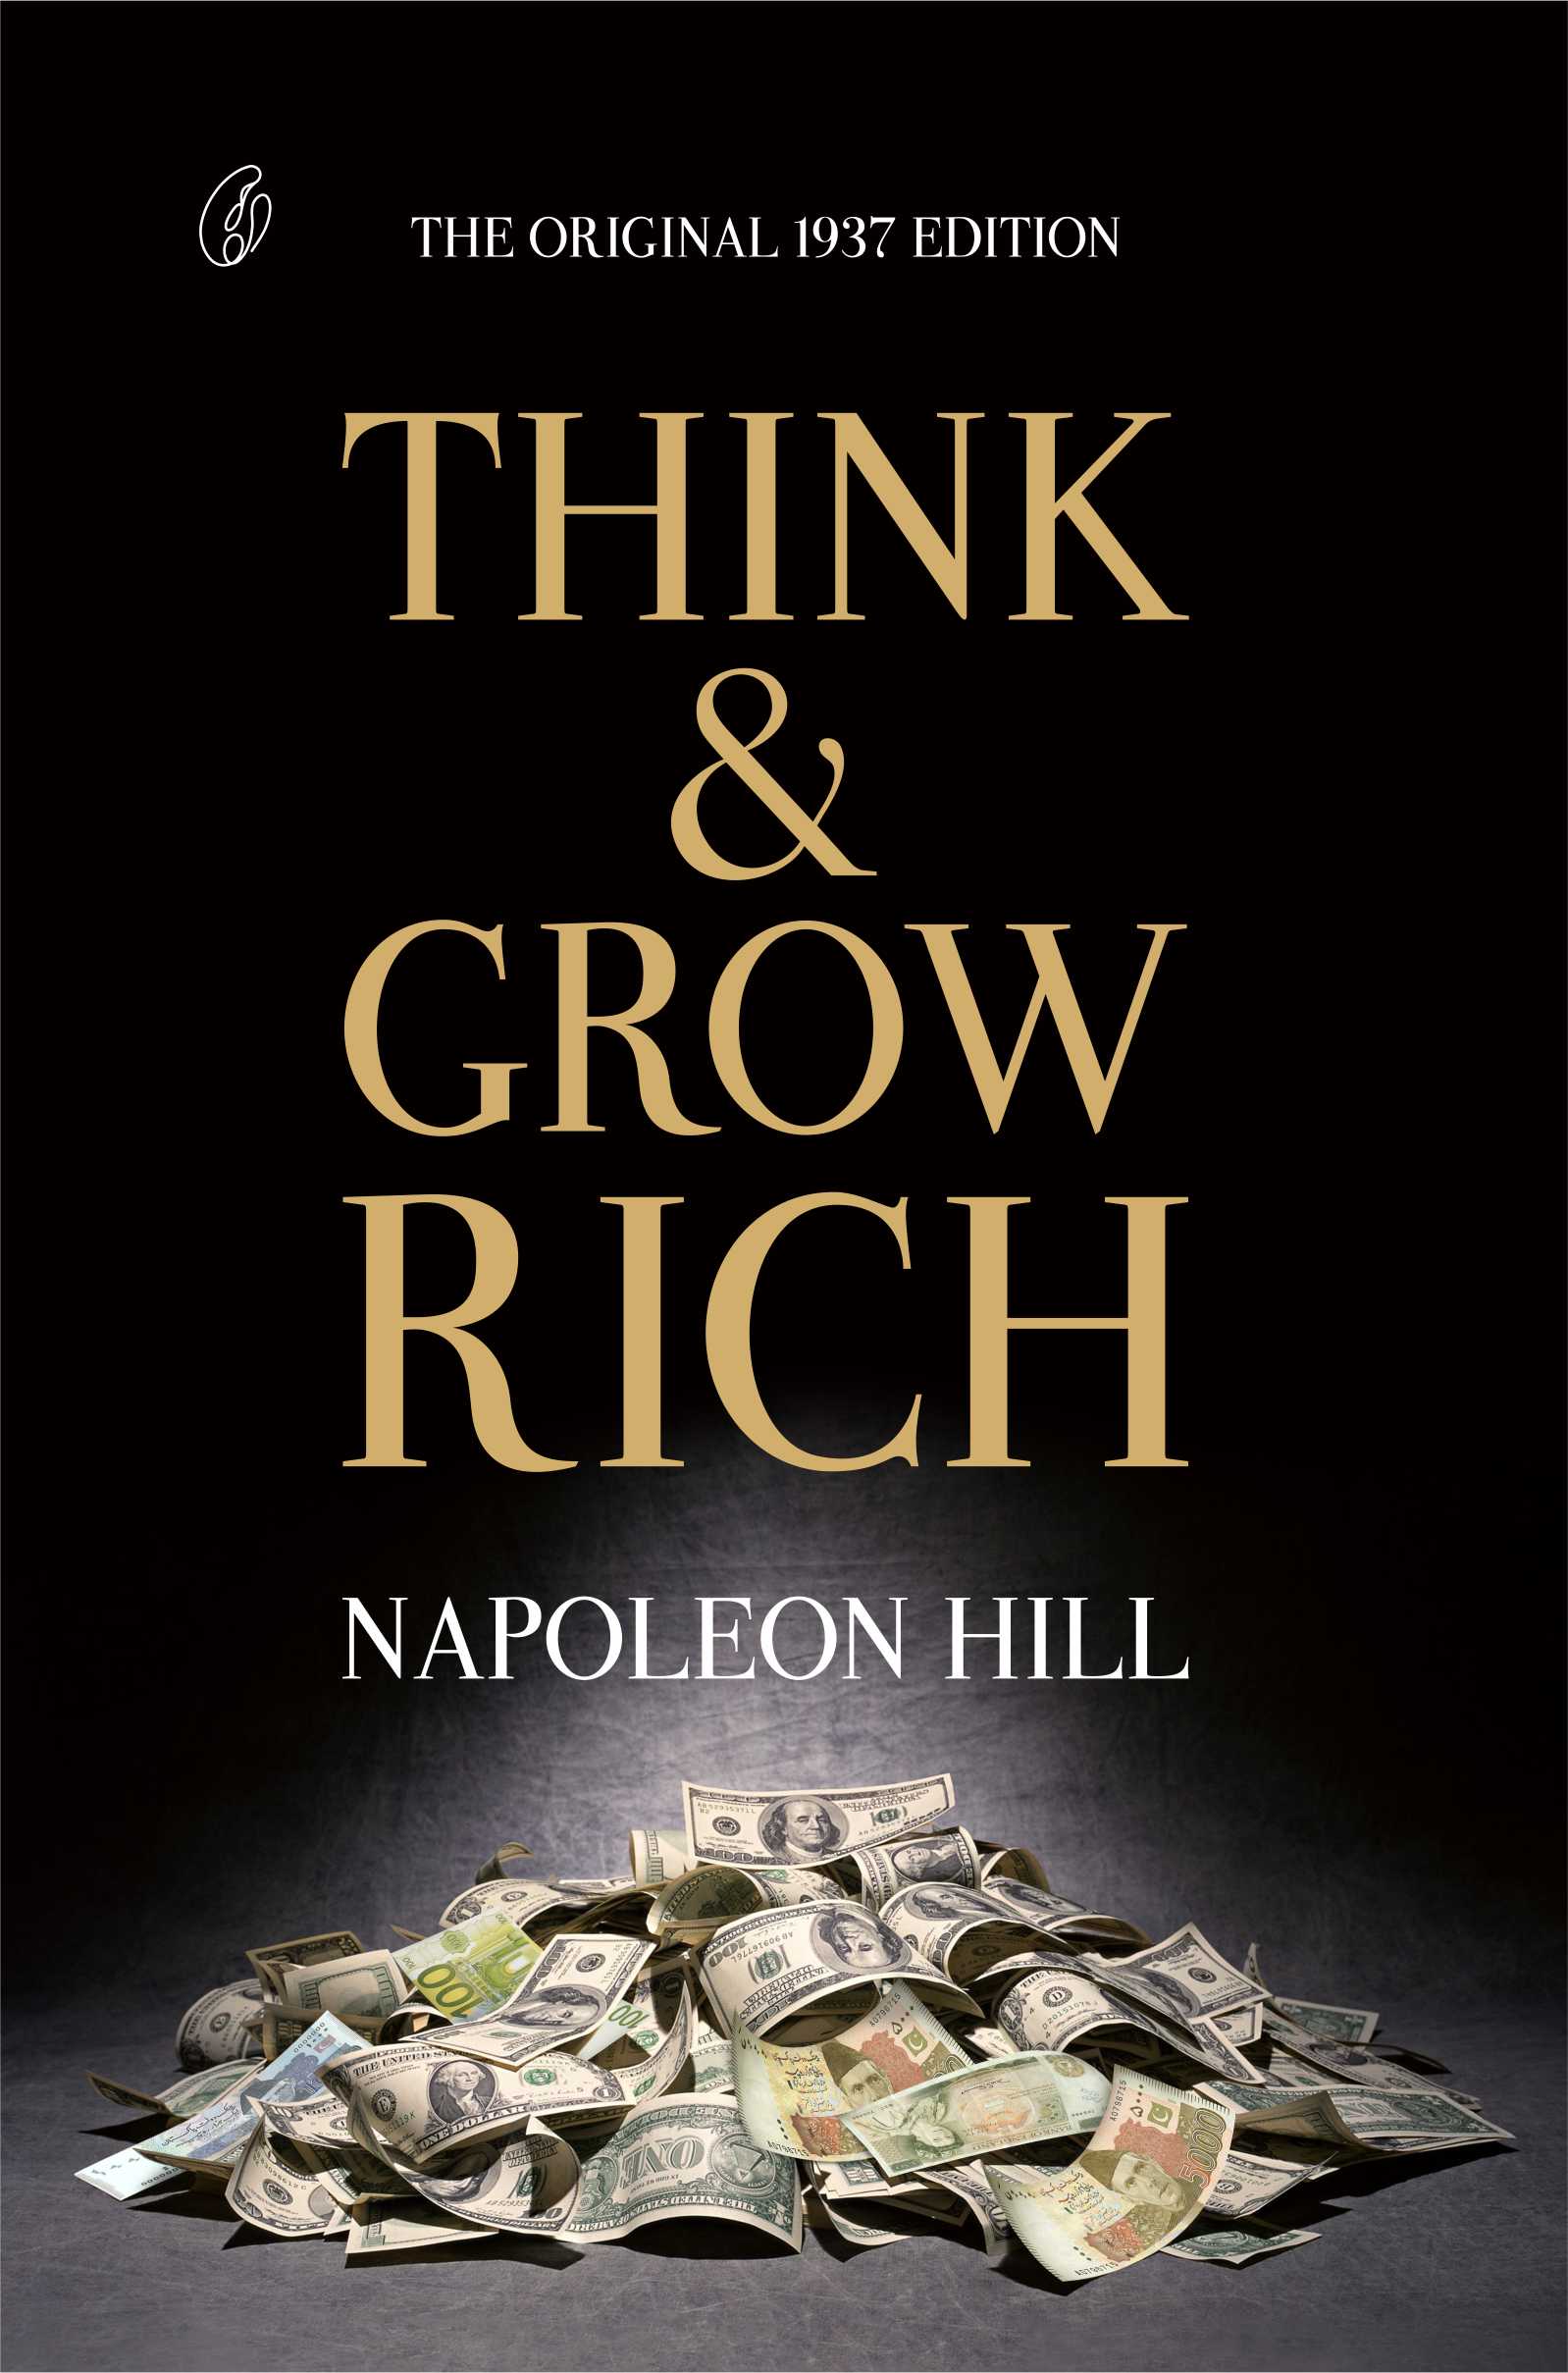 Рич книги. Think and grow Rich by Napoleon Hill. Napoleon Hill think and grow Rich book. Think and grow Rich книга. Napoleon Hill think.